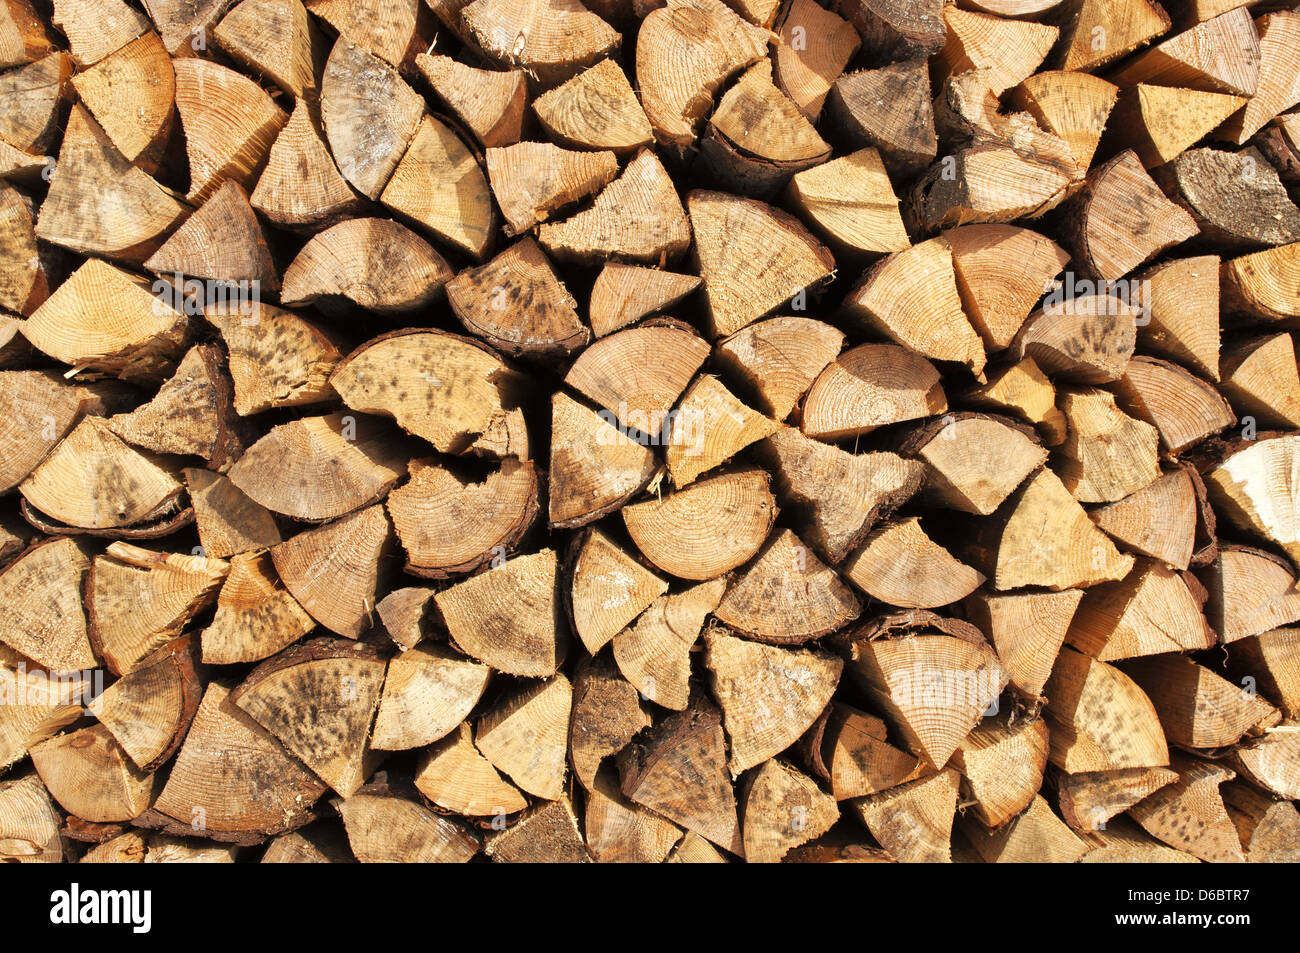 Texture - Chopped and stacked pile of pine and birch wood, cut for fireplace. Stock Photo